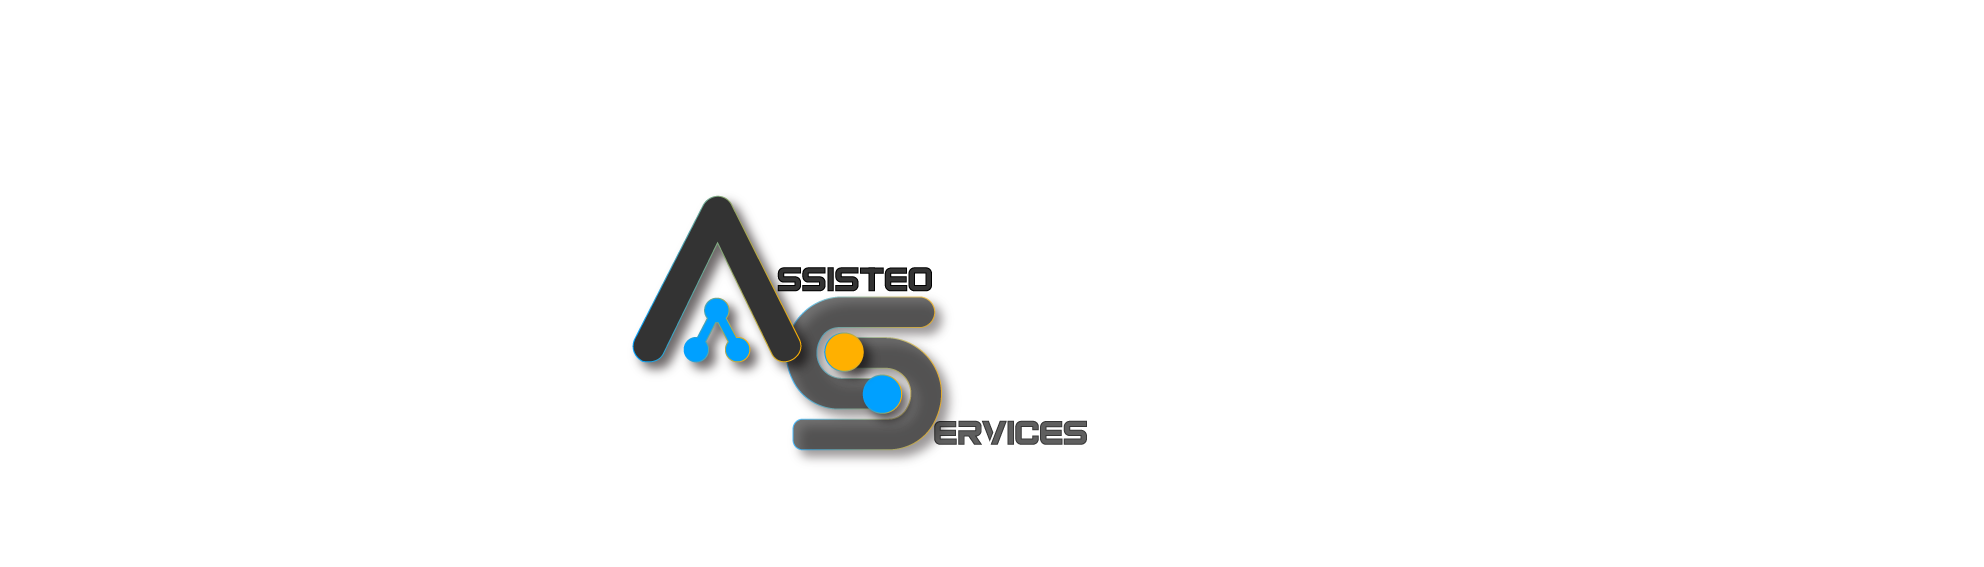 Assisteo services